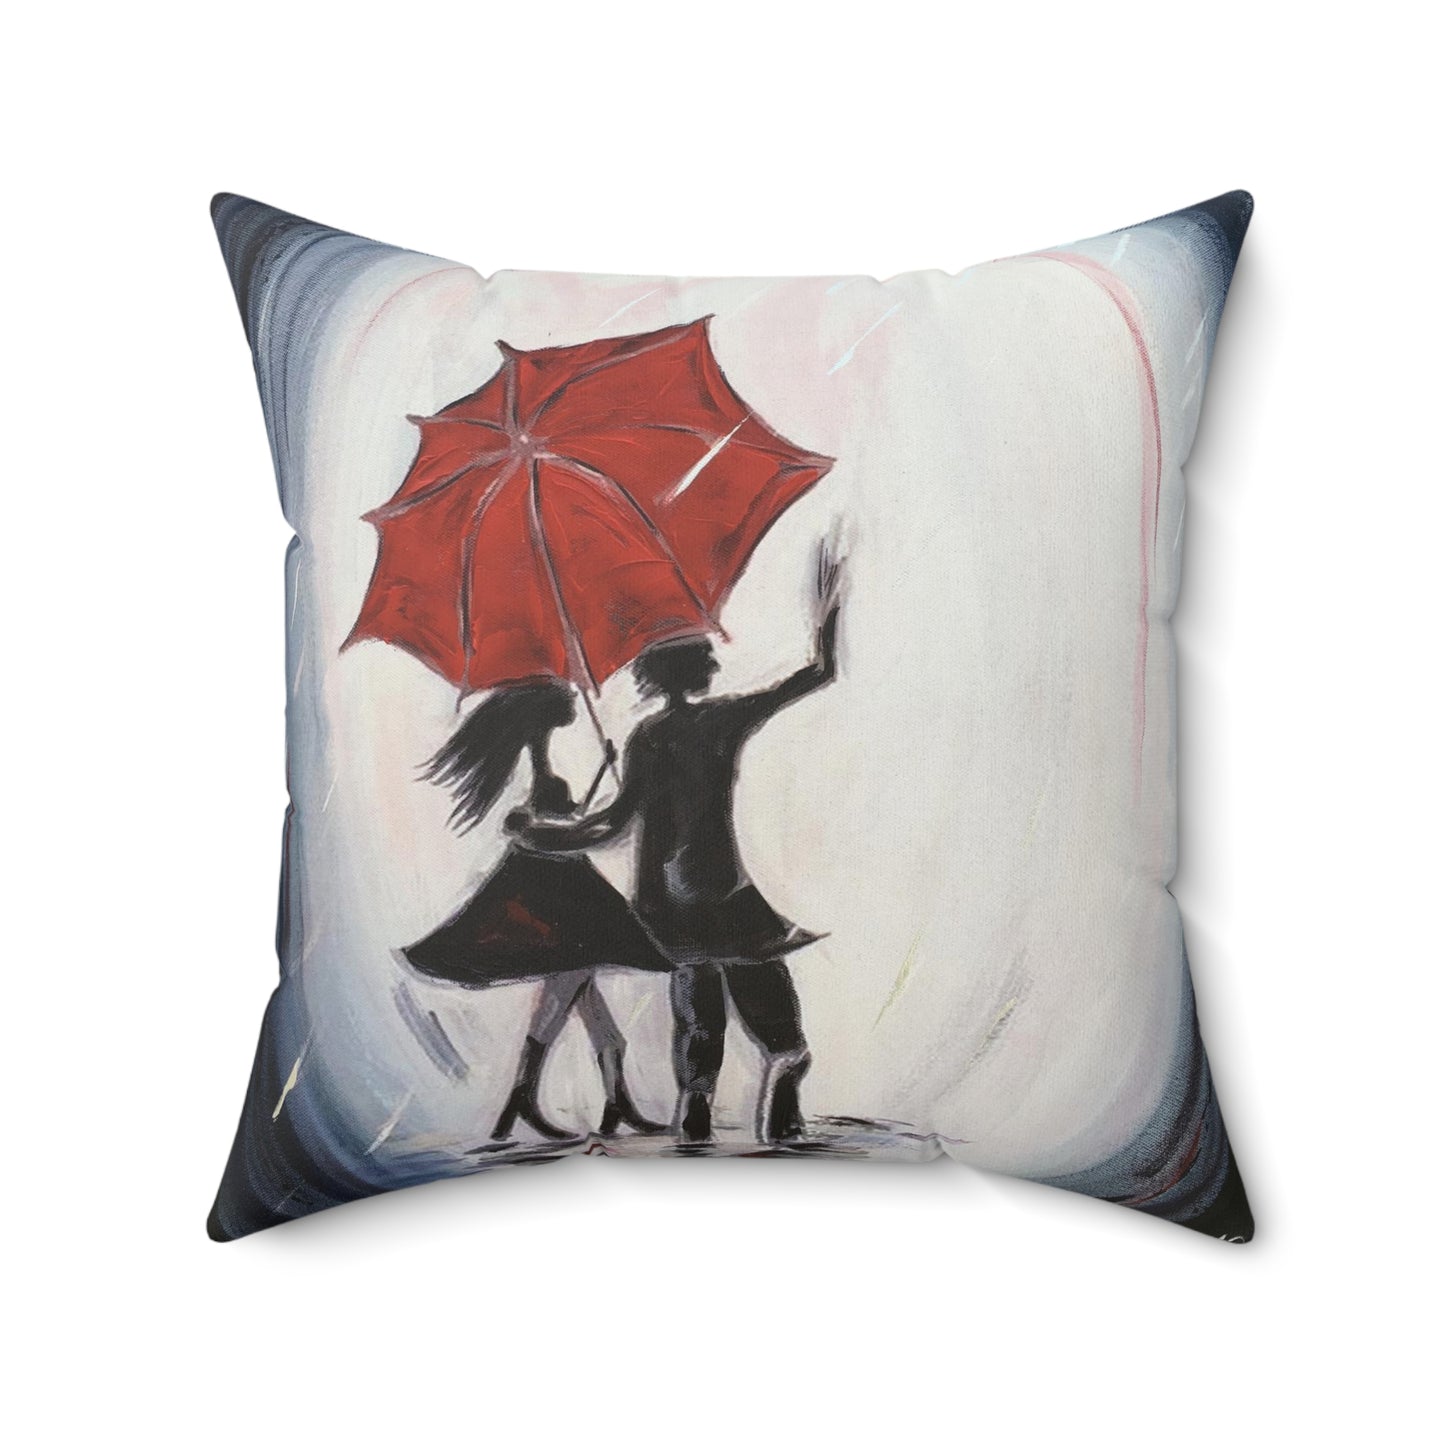 Walking in the Rain (Romantic Couple) Indoor Spun Polyester Square Pillow